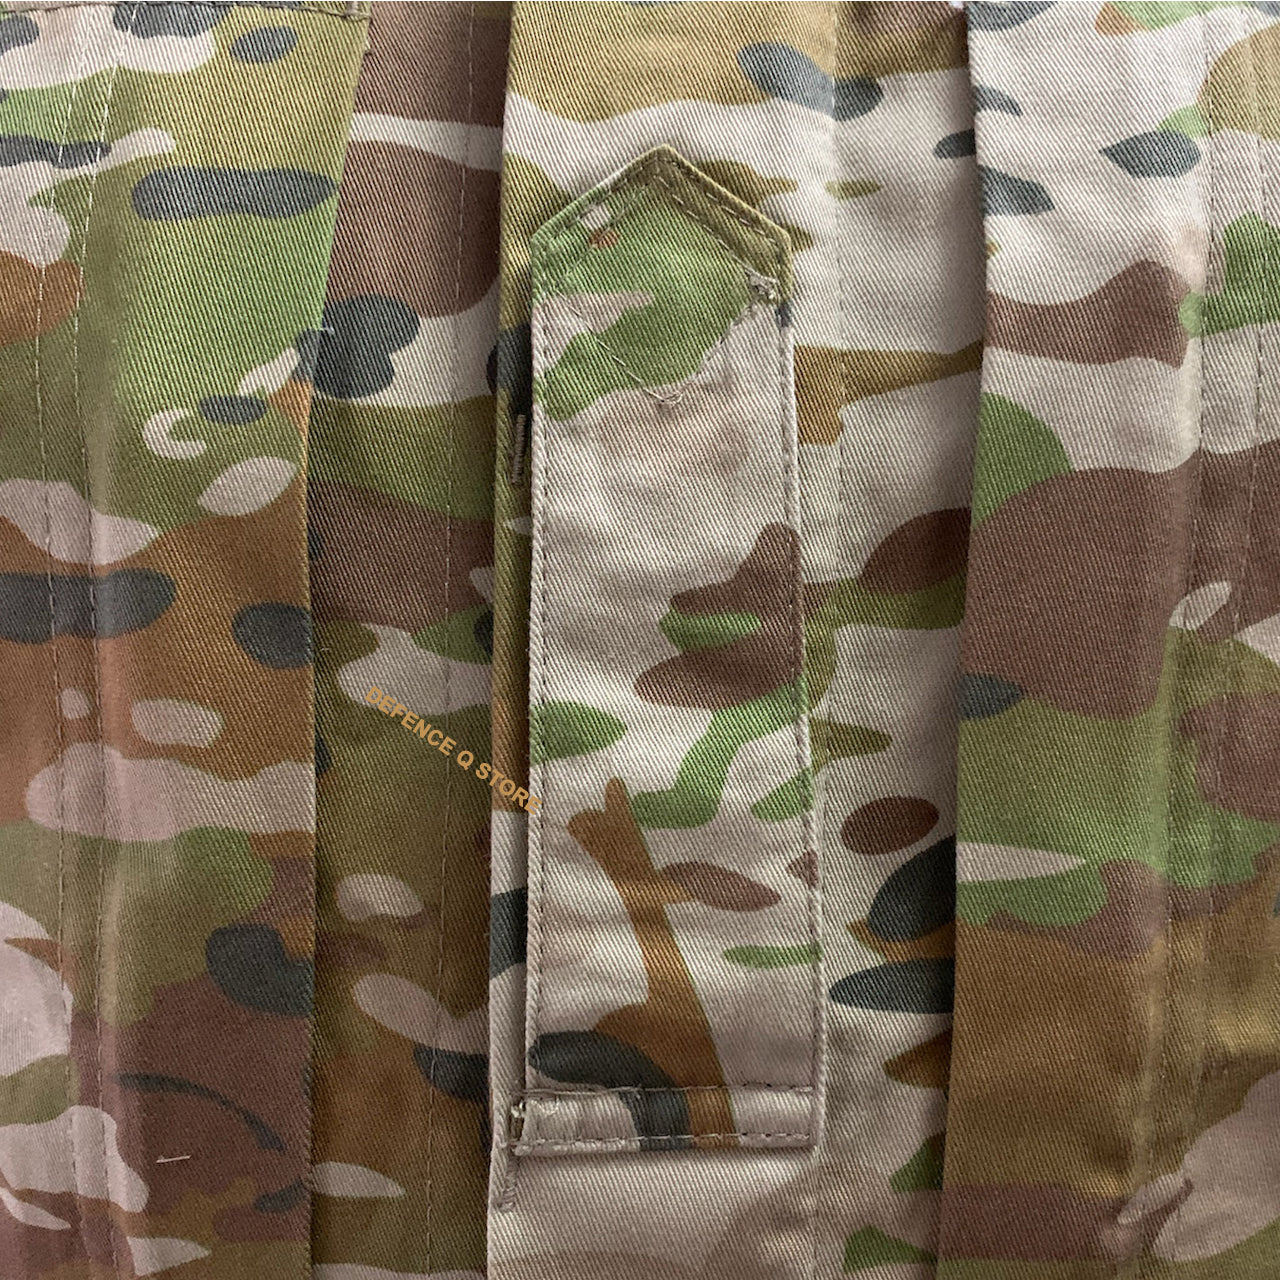 Be ready for any mission with our Army Tactical Field Shirt AMC! Made from 100% cotton, it's durable and comfortable for all day wear. With a single epaulette on the chest and buttoned shoulder pockets, you'll have easy access to necessary items. Plus, the zippered chest pockets add extra storage space. Customize your look by adding velcro patches to both arms. This shirt is a must-have for any tactical enthusiast. www.defenceqstore.com.au